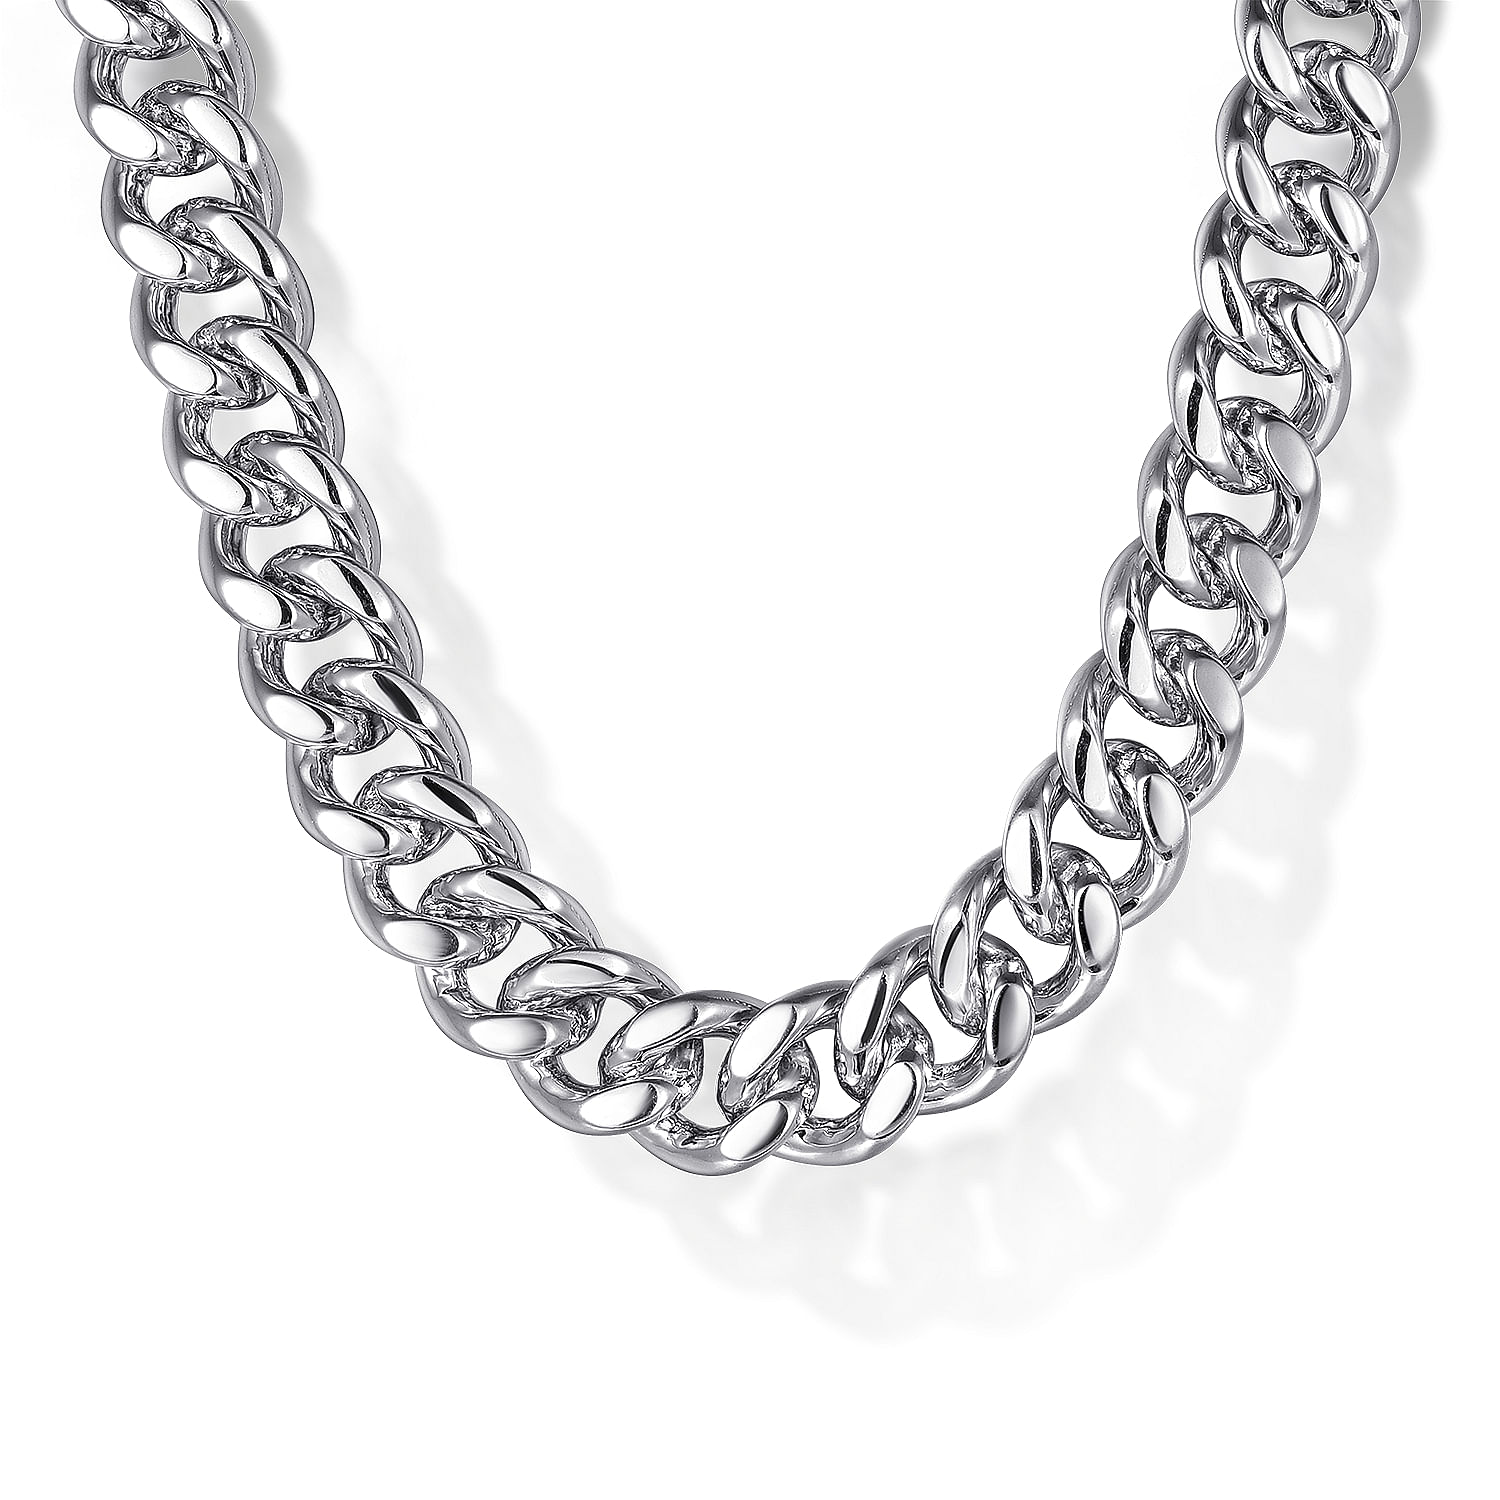 24 Inch 7mm 925 Sterling Silver Solid Men's Diamond Cut Chain Link Necklace